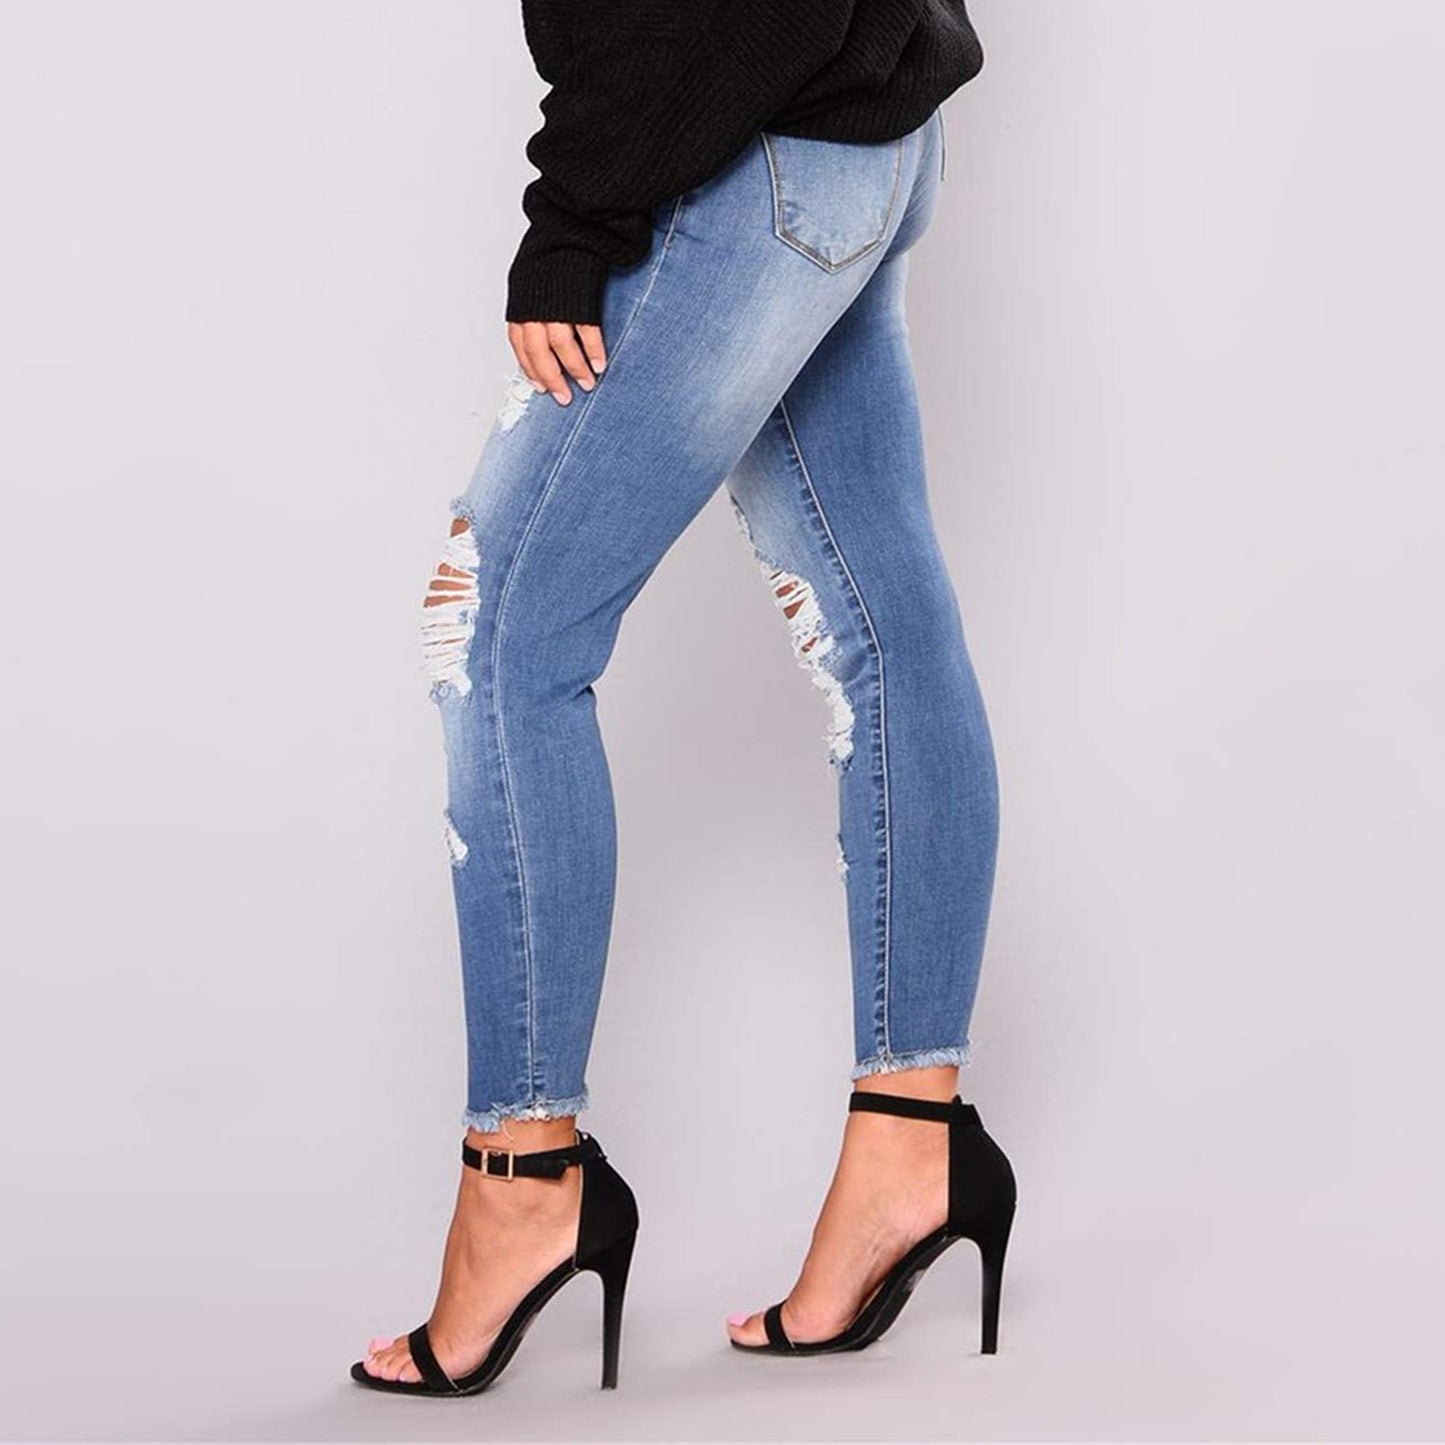 Women's Stretchy Ripped Jeans Butt Lifting Distressed Denim Pants with Pockets Destroyed Pencil Jean